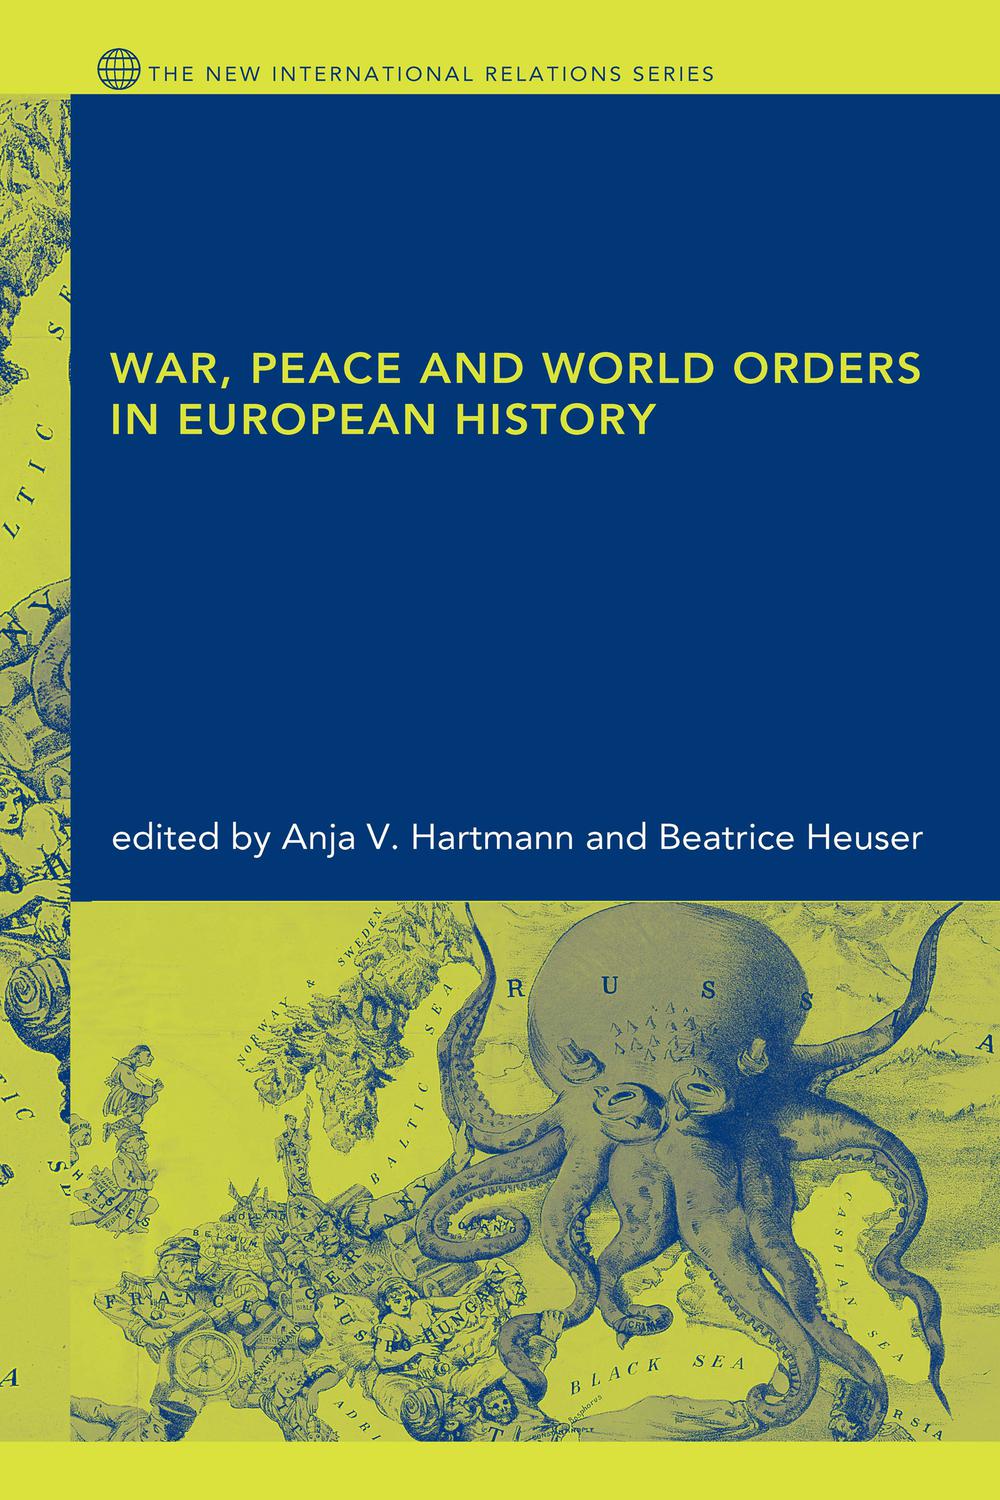 War, Peace and World Orders in European History - Anja V. Hartmann, Beatrice Heuser